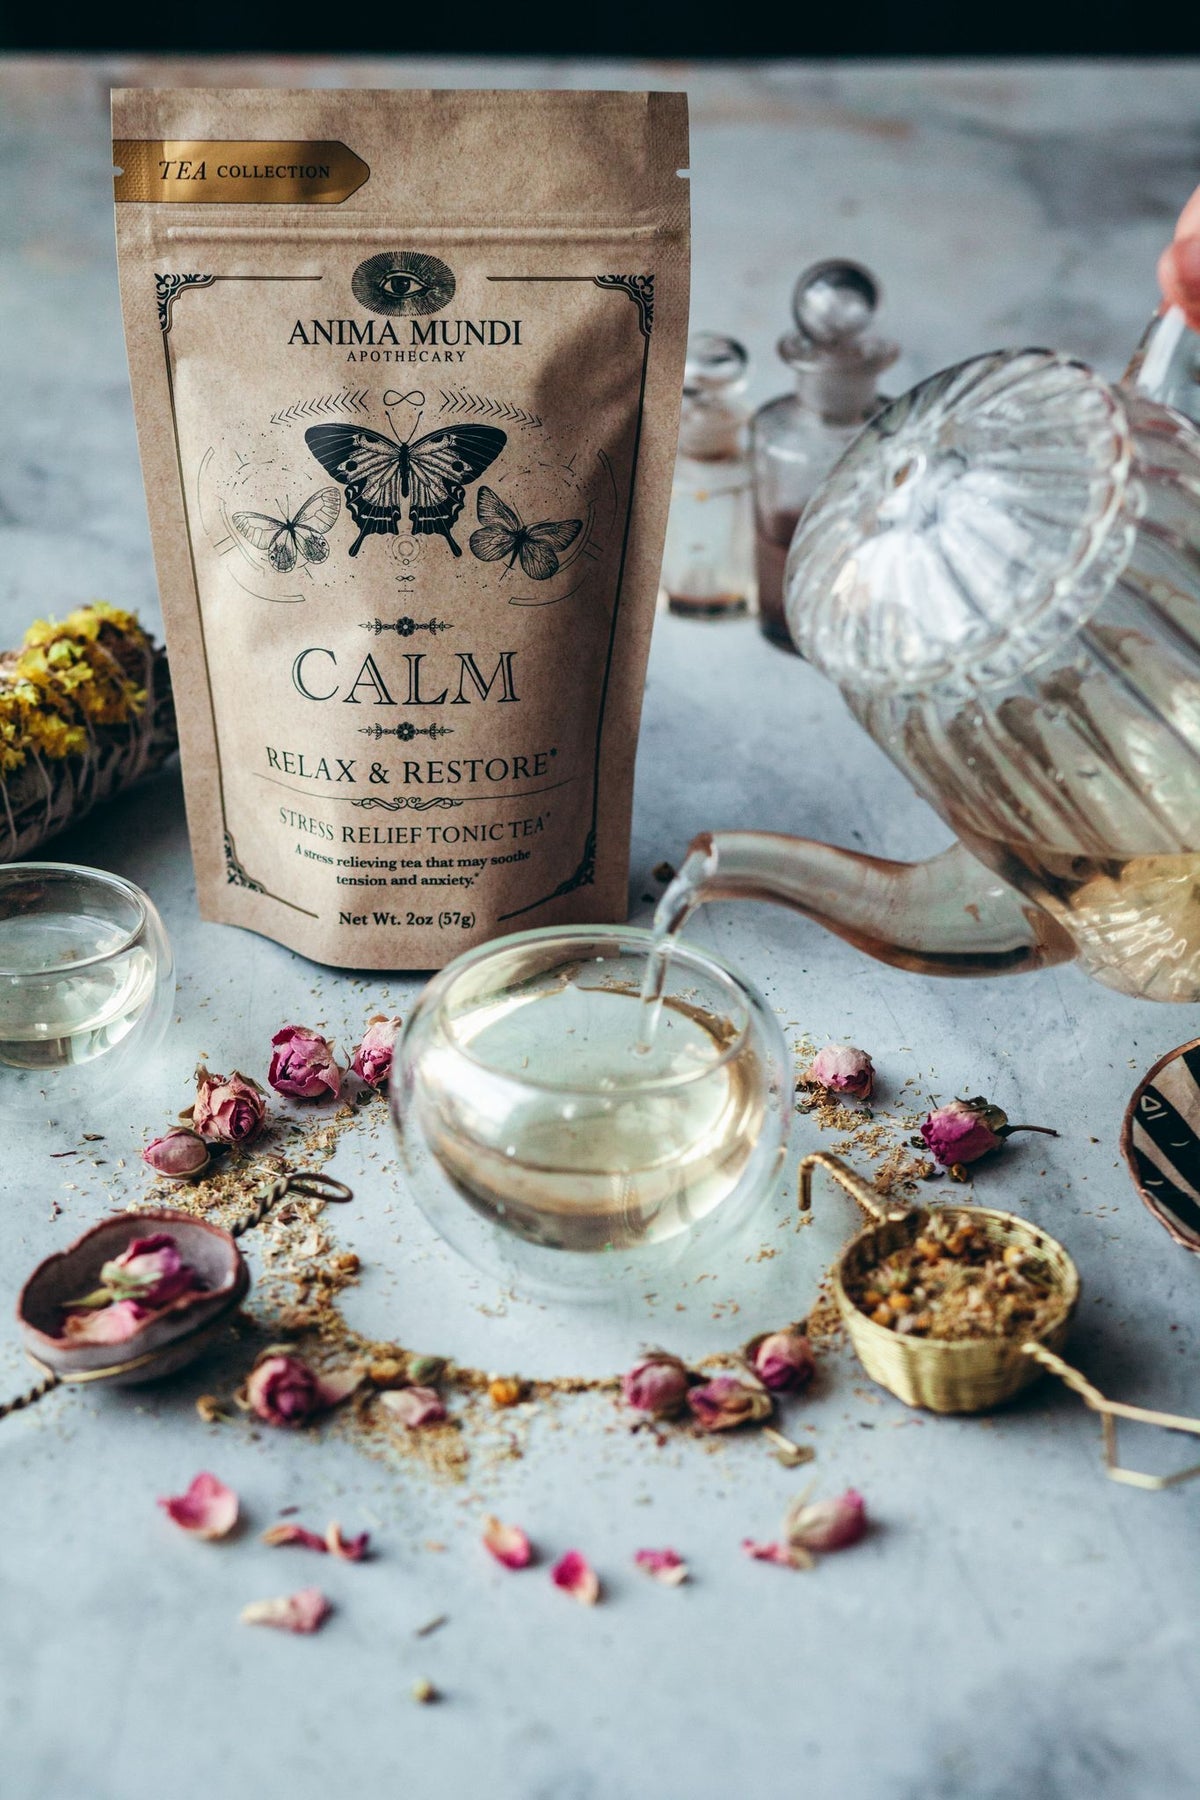 anima mundi herbals calm tea / This is an exquisite and effective herbal tea for those dealing with stress, anxiety and symptoms of trauma. Contains essential nervines - nervous system decompressors - that are known to greatly relax the system.